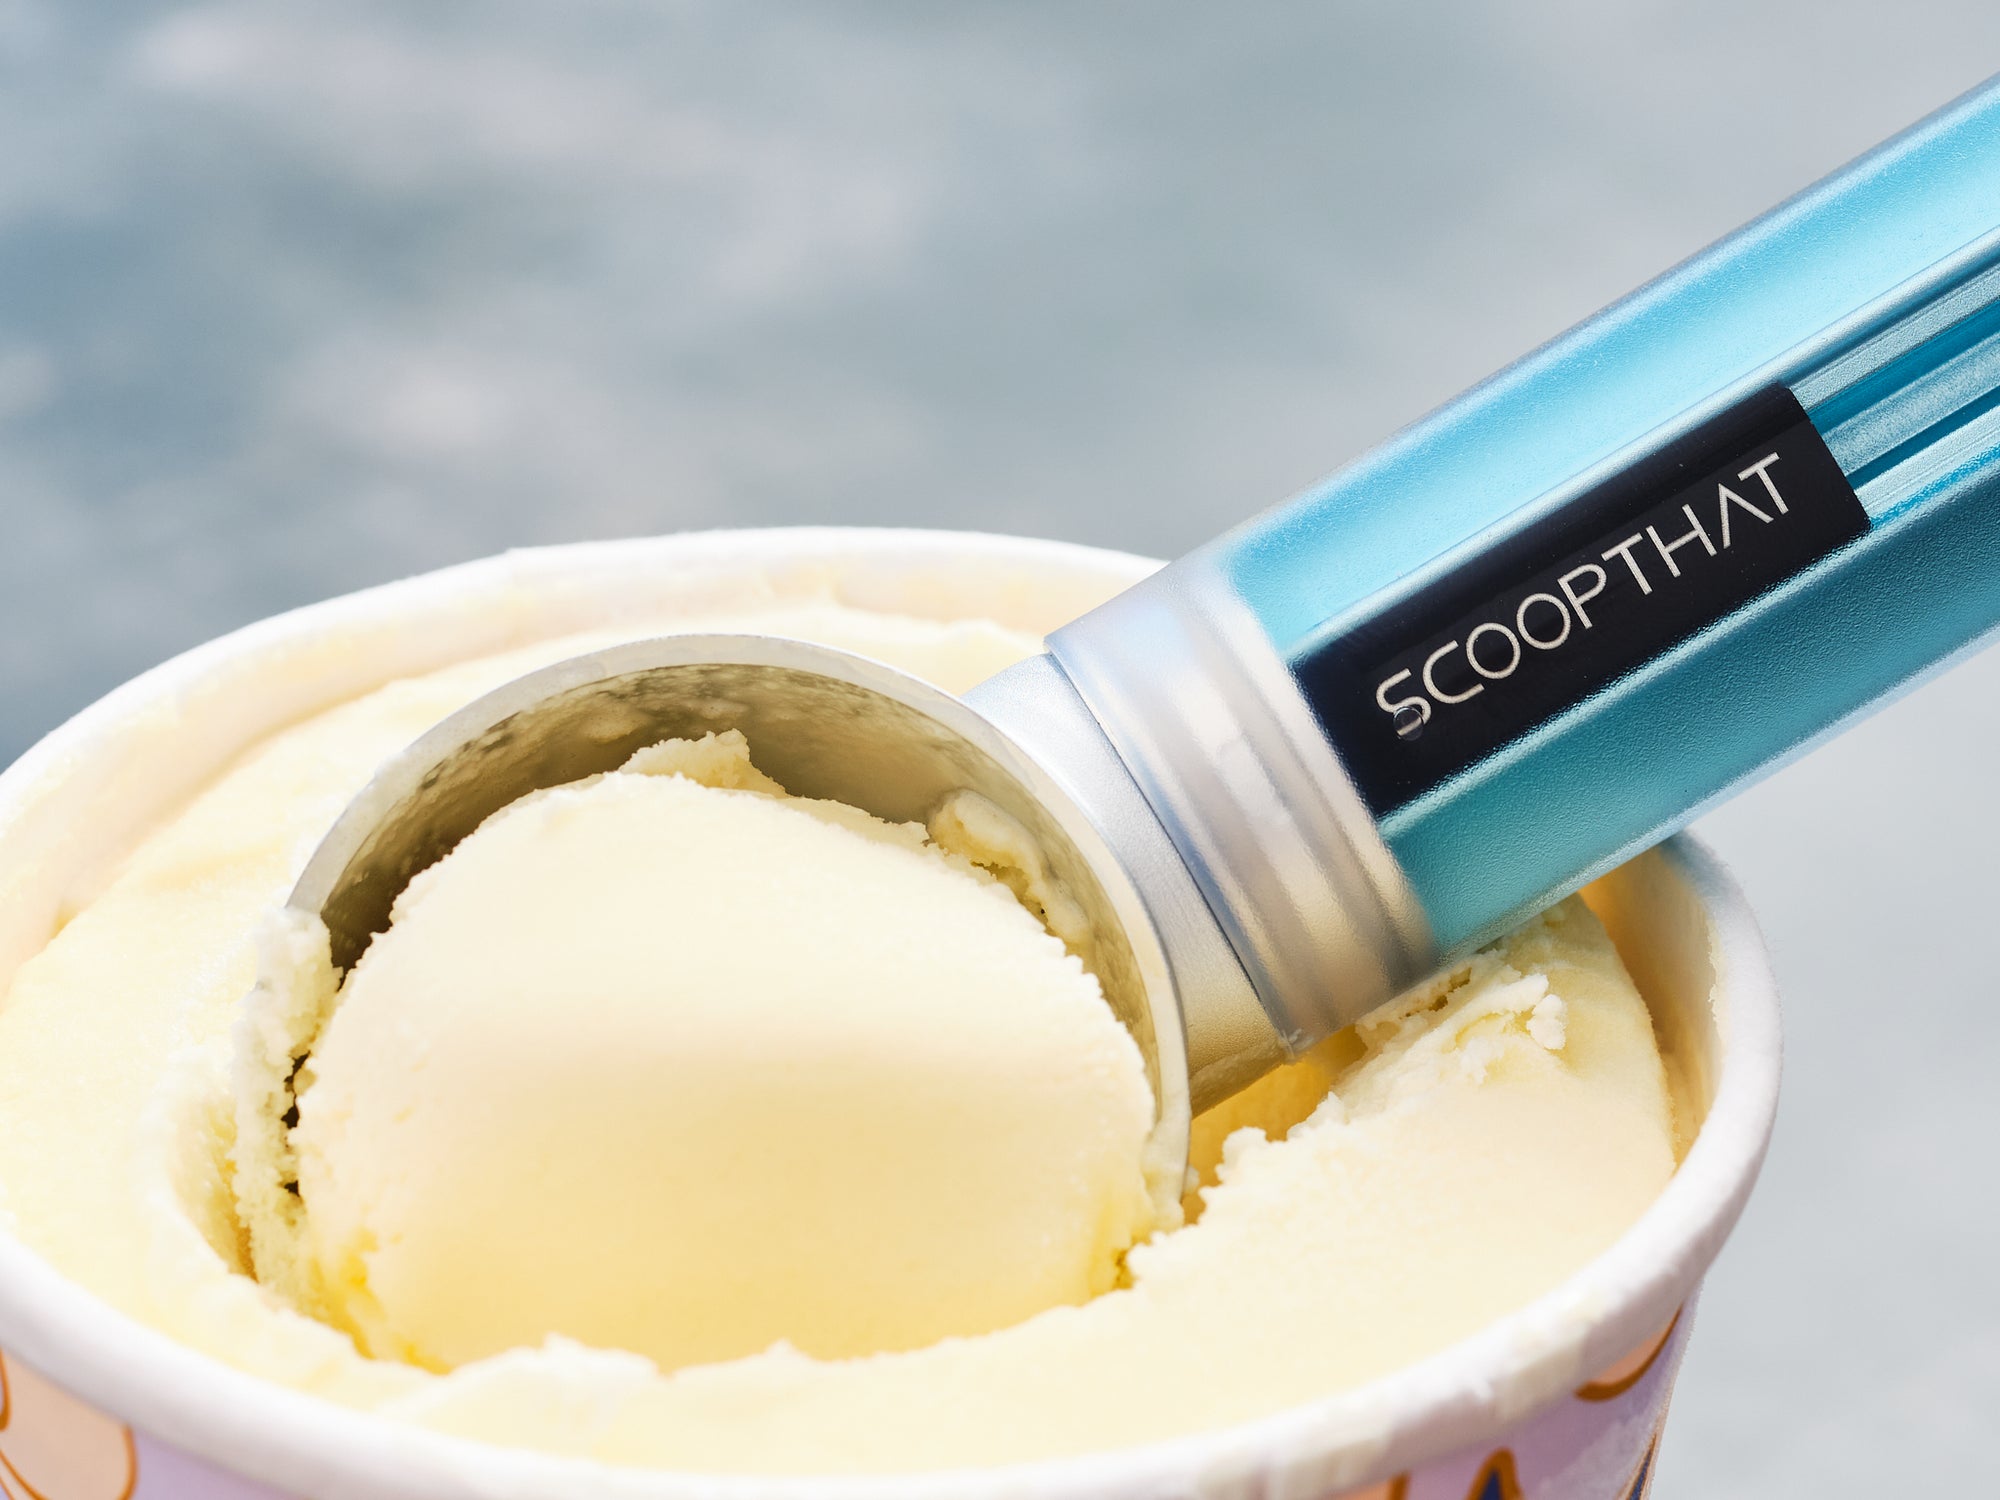 ScoopTHAT! - Thermo-Ring Heated Ice Cream Scoop